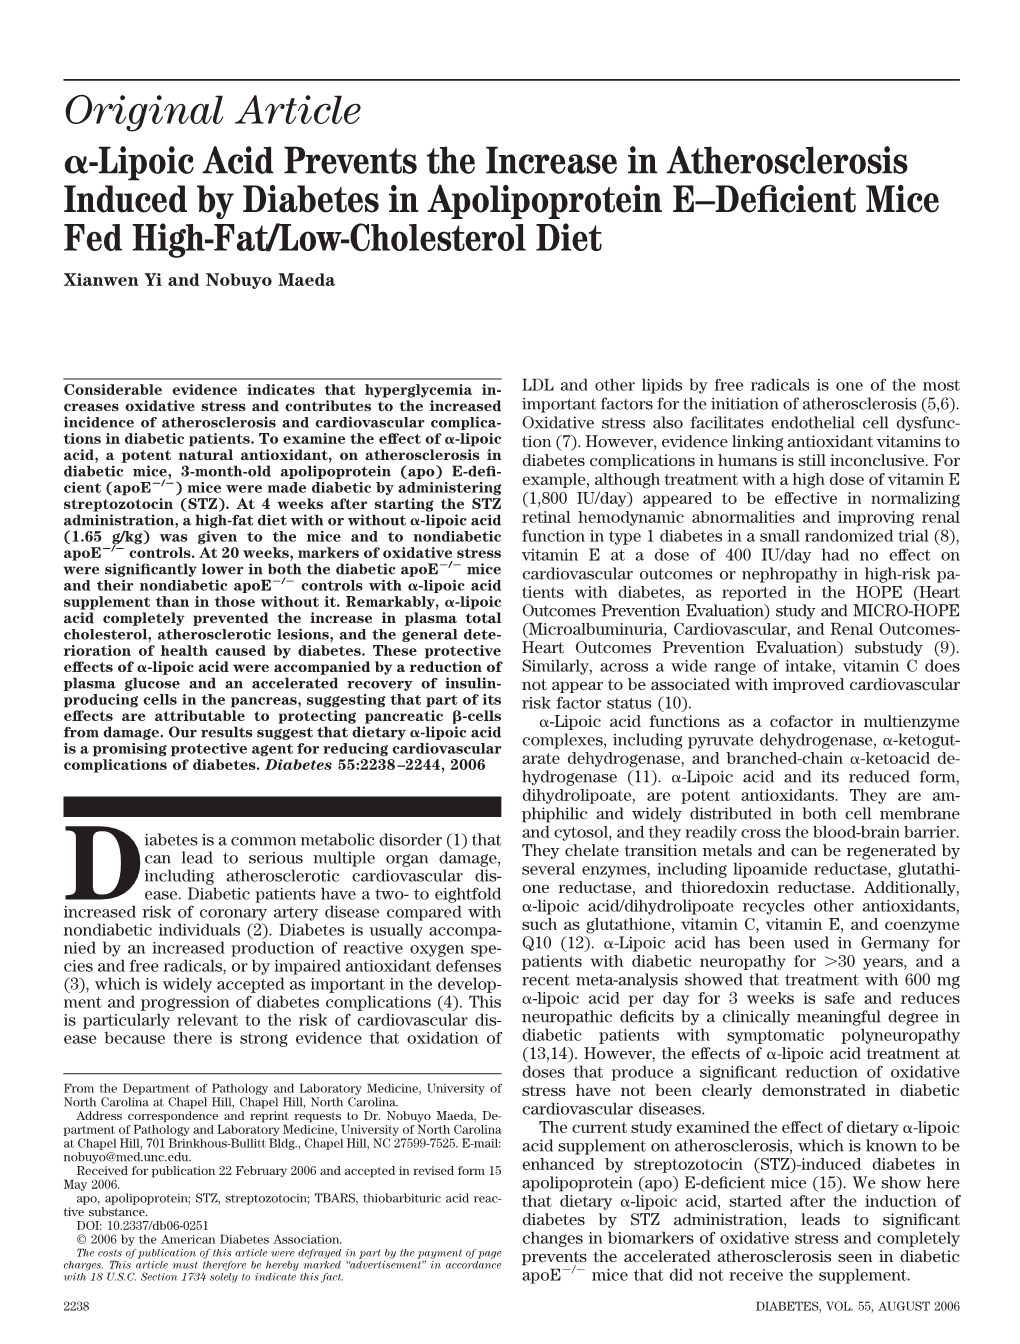 Original Article -Lipoic Acid Prevents the Increase in Atherosclerosis Induced By